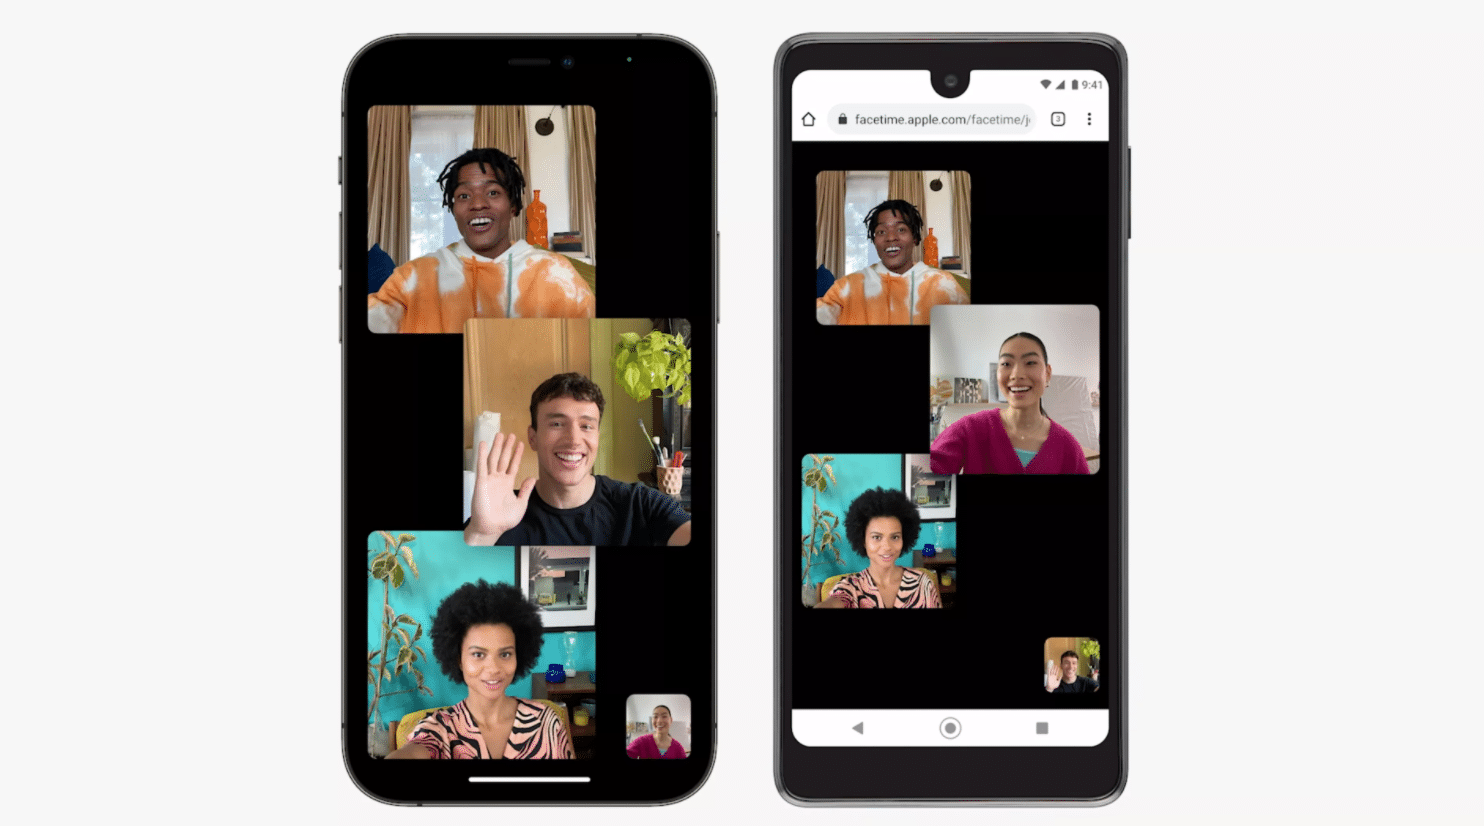 facetime on android